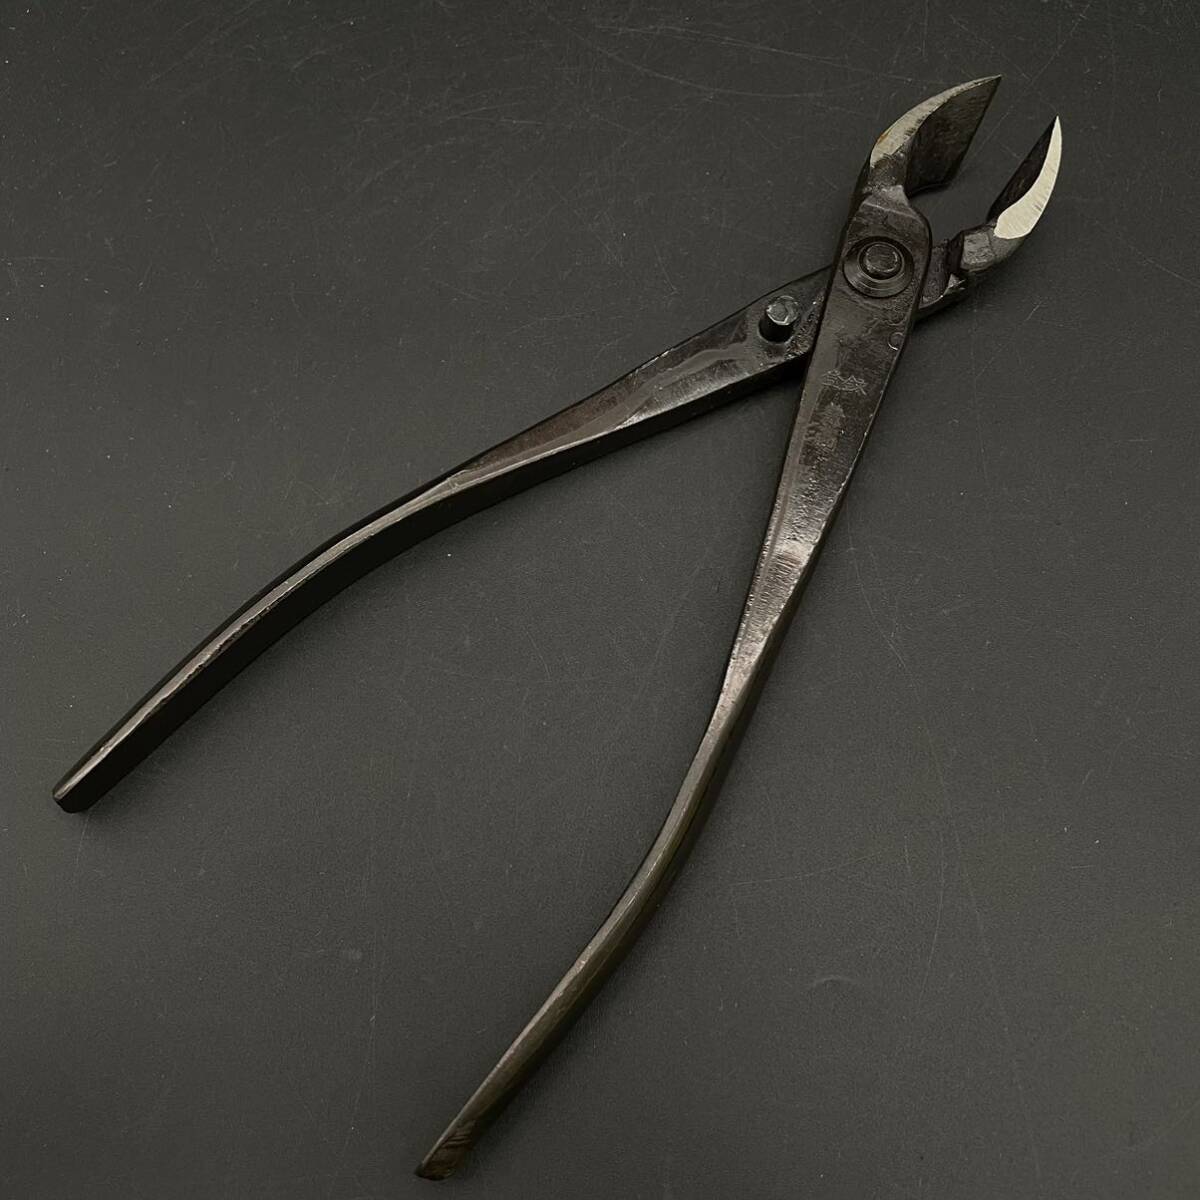 [ new goods unused goods ]. height tongs scissors . bonsai gardening pruning plant kob cut . branch ... repairs gardening supplies box attaching recommendation total length approximately 20cm